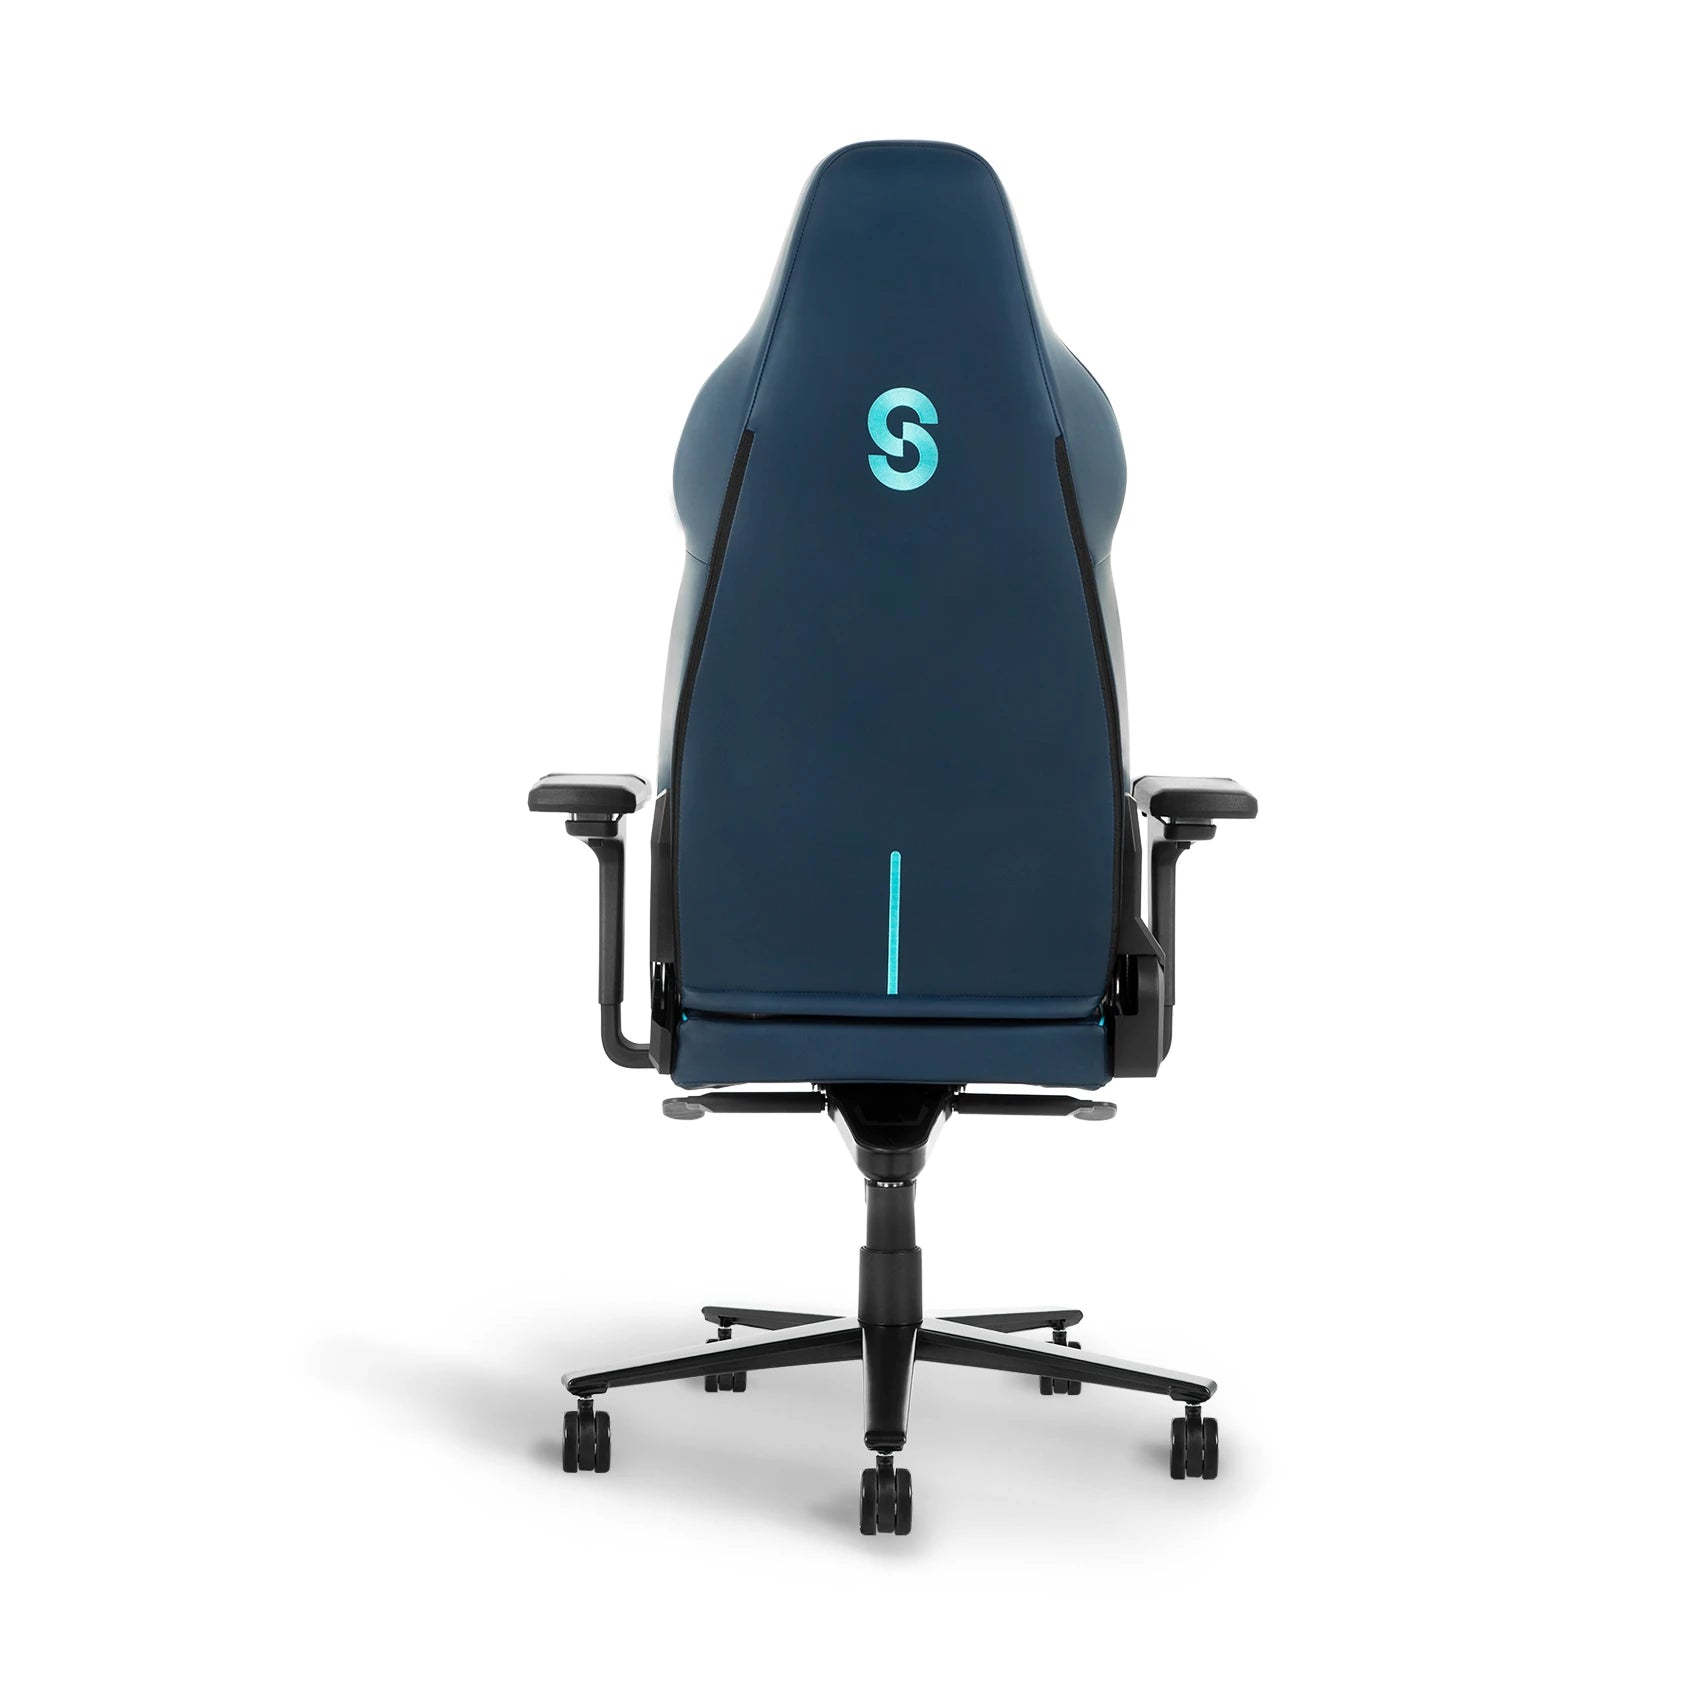 blue view of a blue ergonomic gaming chair with a black 'S' logo and adjustable components.